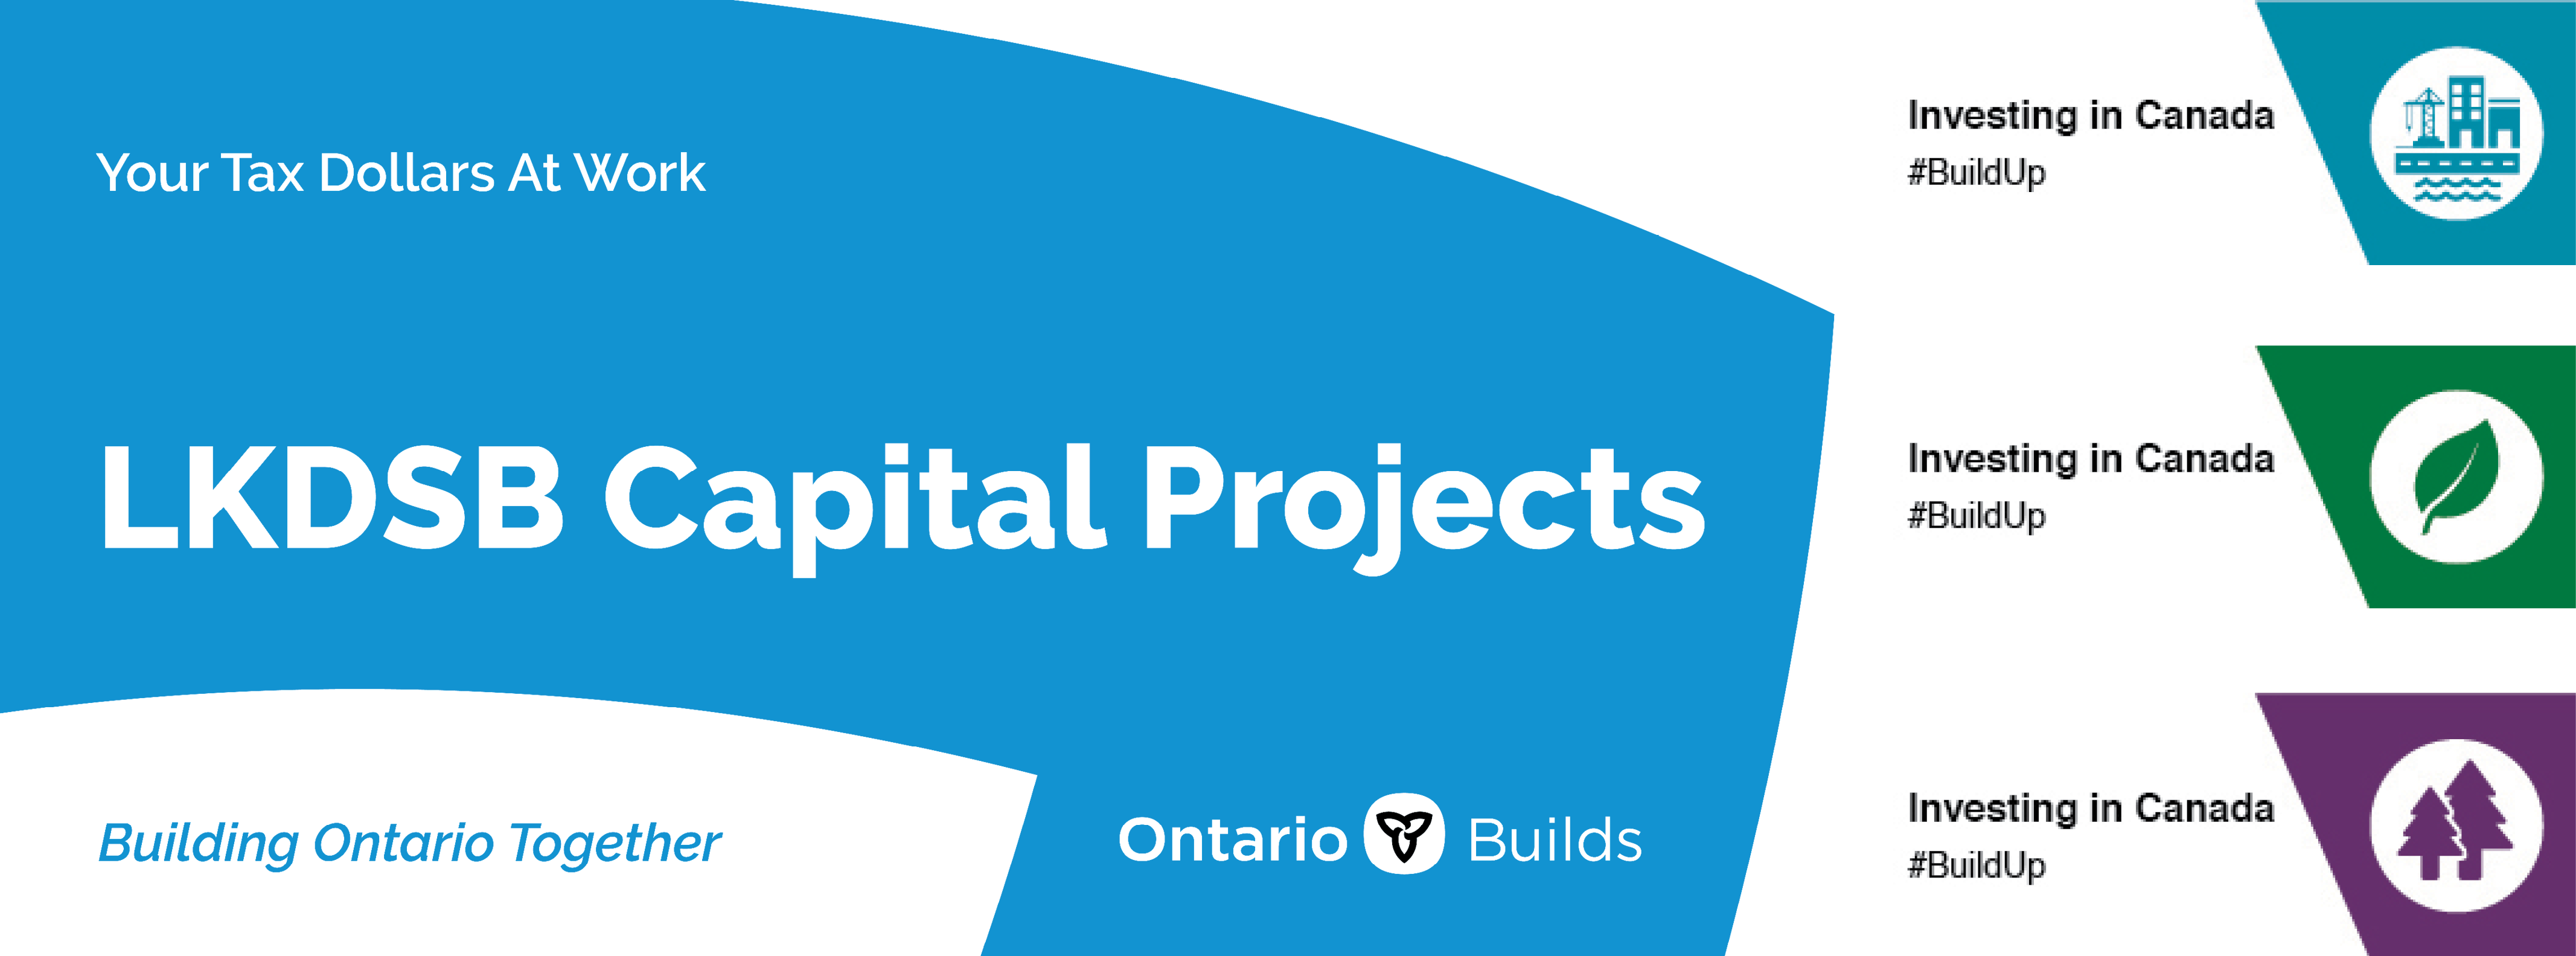 Capital Projects - Investing in Canada Infrastructure Program